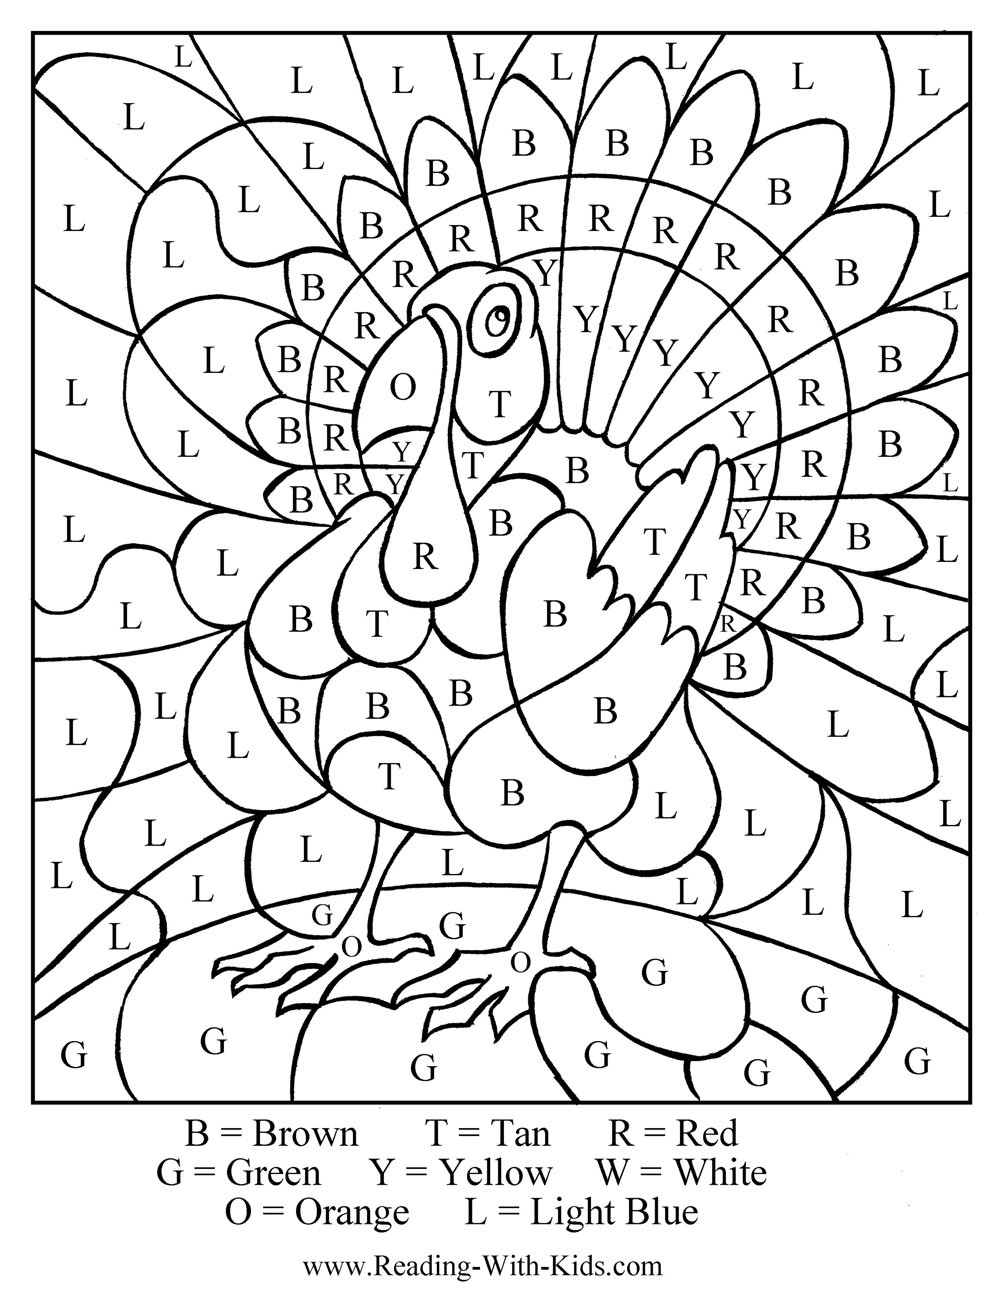 Thanksgiving Turkey Coloring Page
 Thanksgiving Coloring Pages